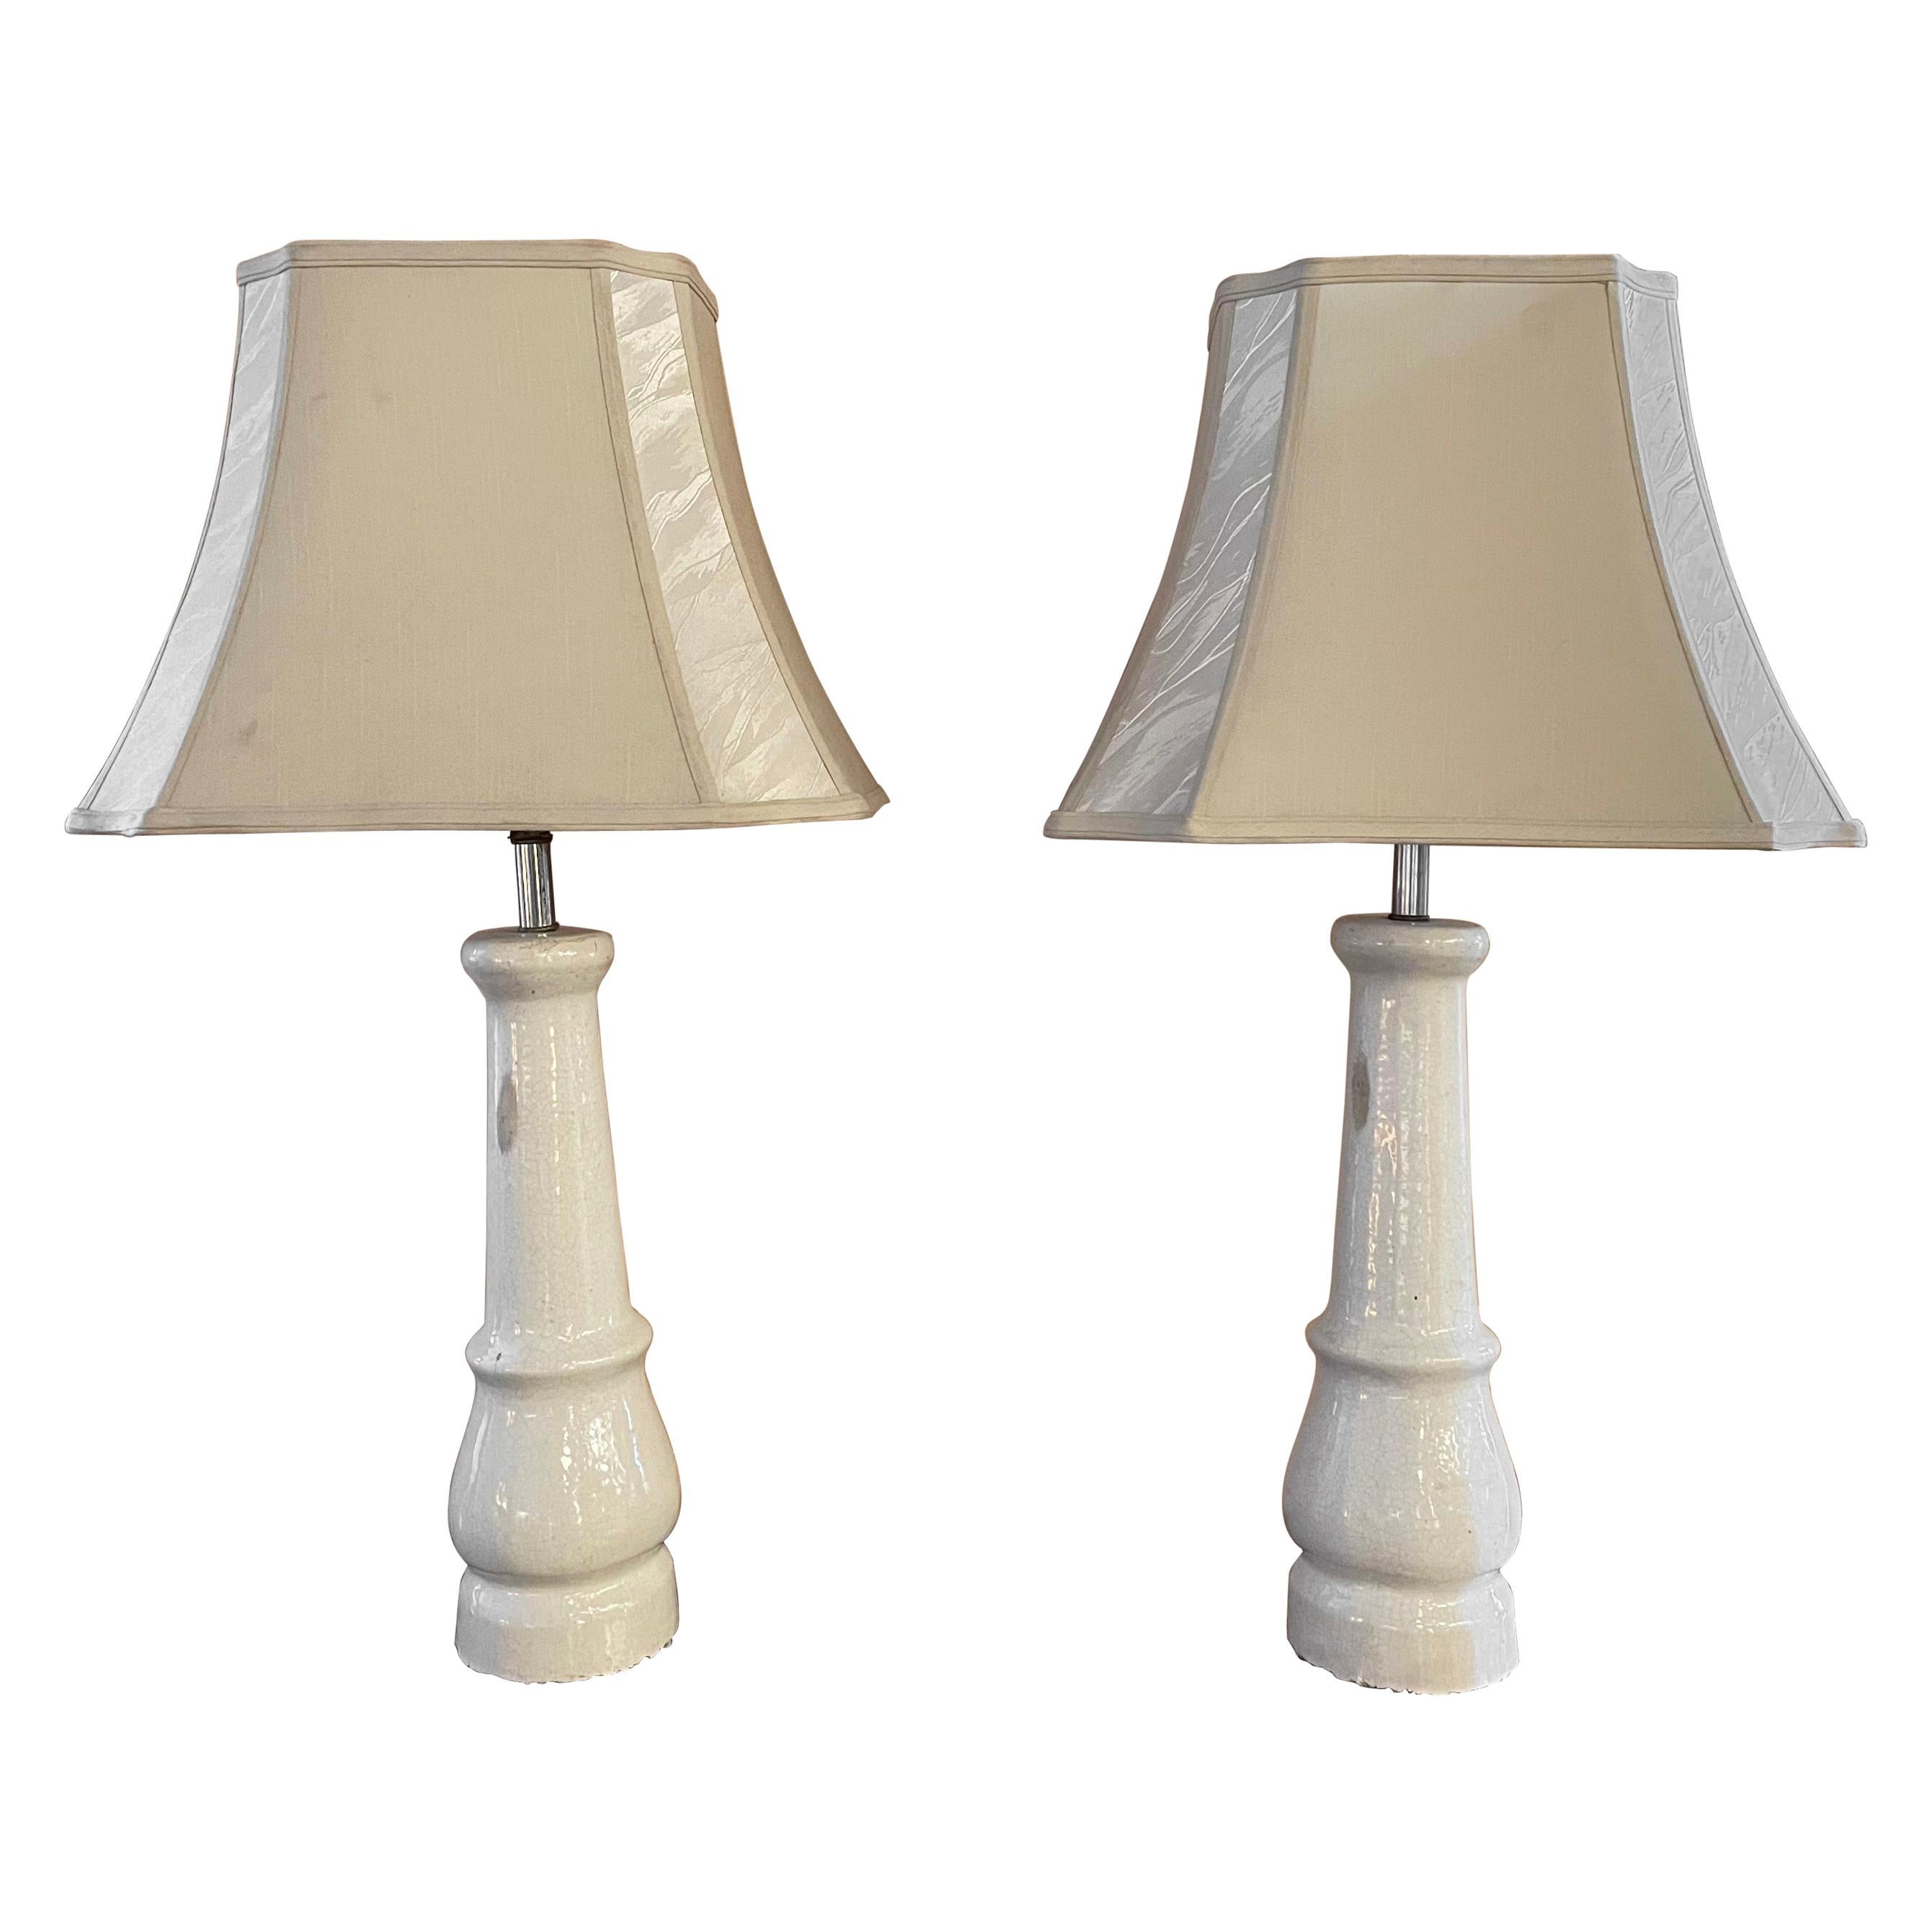 White Porcelain Leg Table Lamps with Shades For Sale